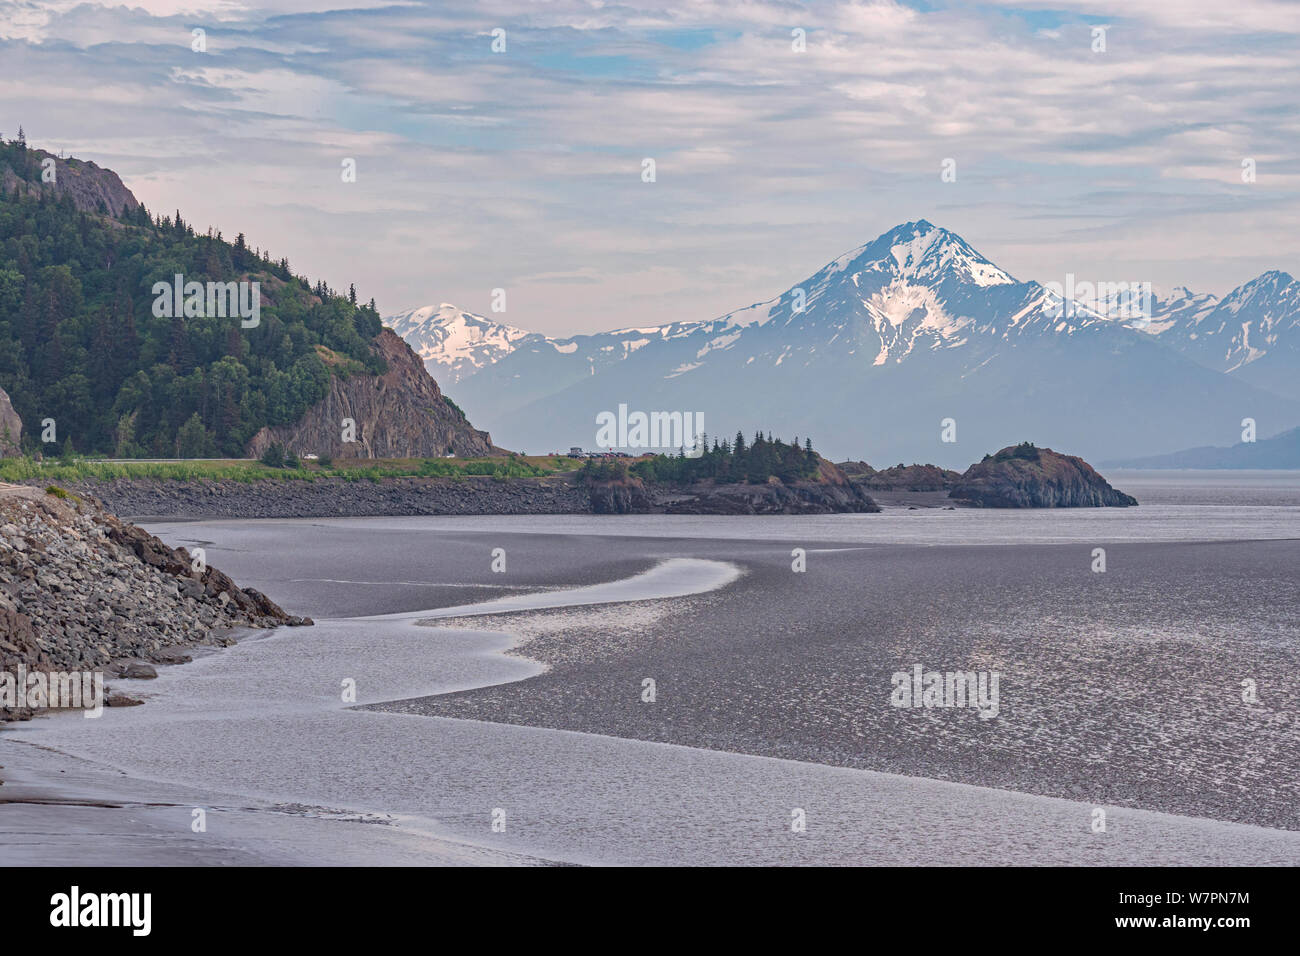 the low tide mudflats of the turnagain arm of cooks inlet in alaska with the Chugach Mountains in the background Stock Photo